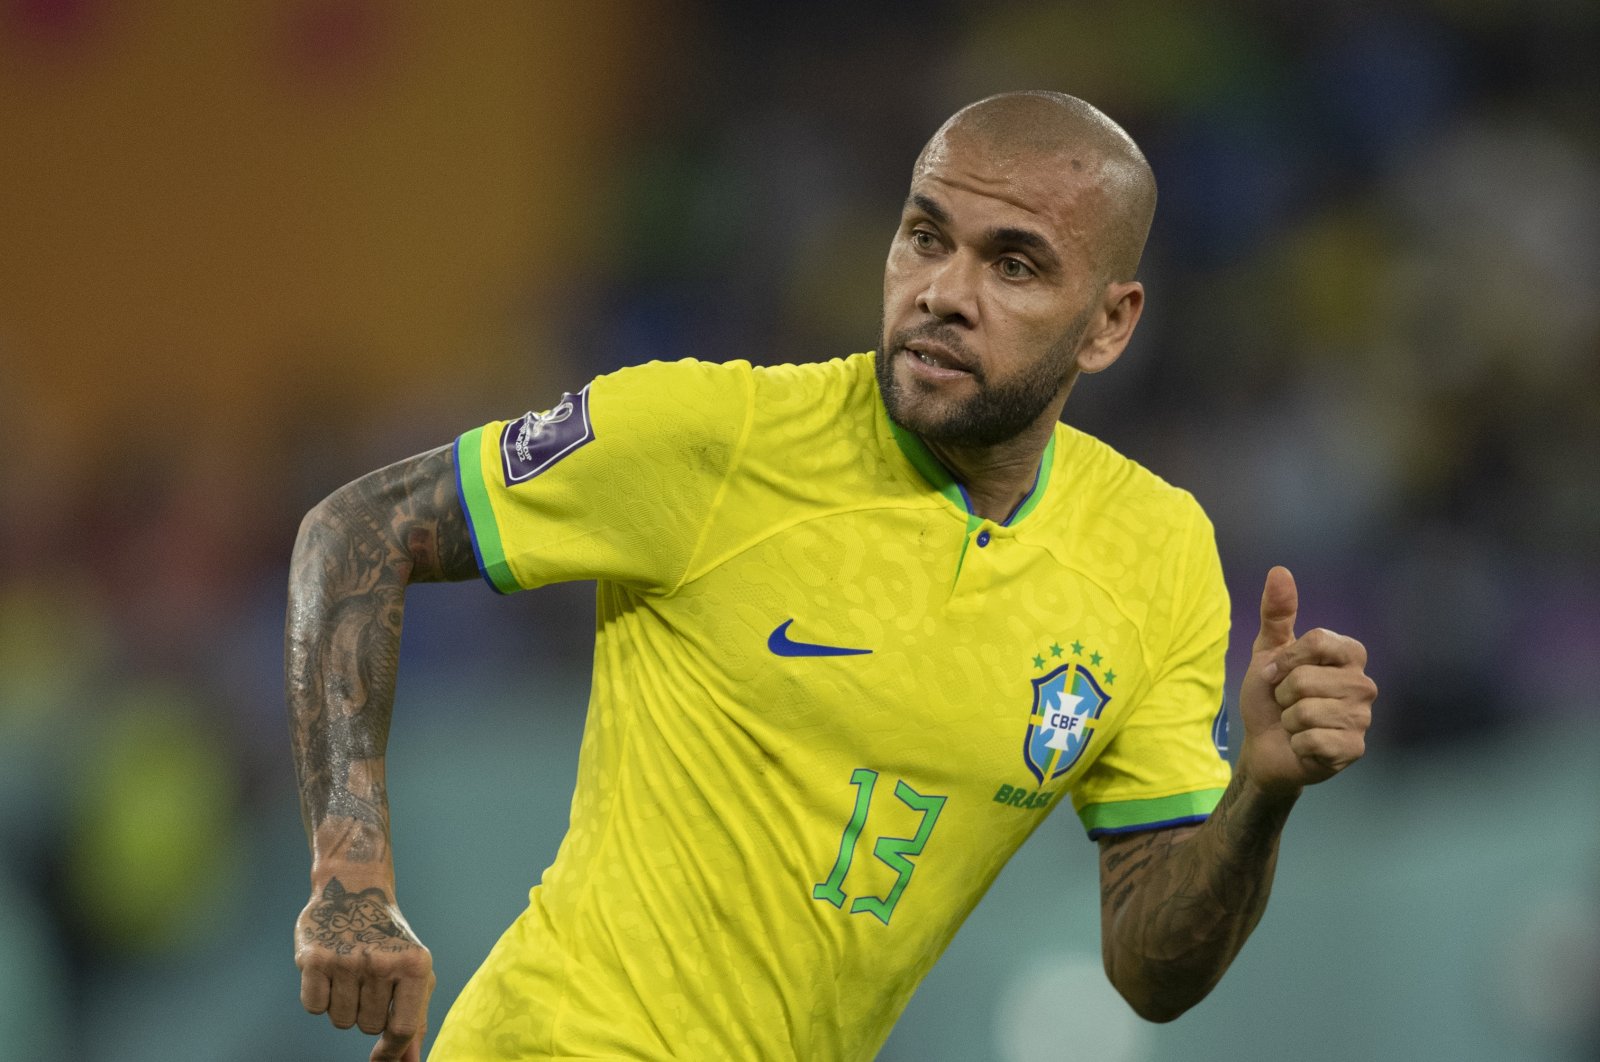 Brazil&#039;s Dani Alves in action during the FIFA World Cup Qatar 2022 Round of 16 match between Brazil and South Korea at Stadium 974, Doha, Qatar, Dec. 5, 2022. (Getty Images Photo)